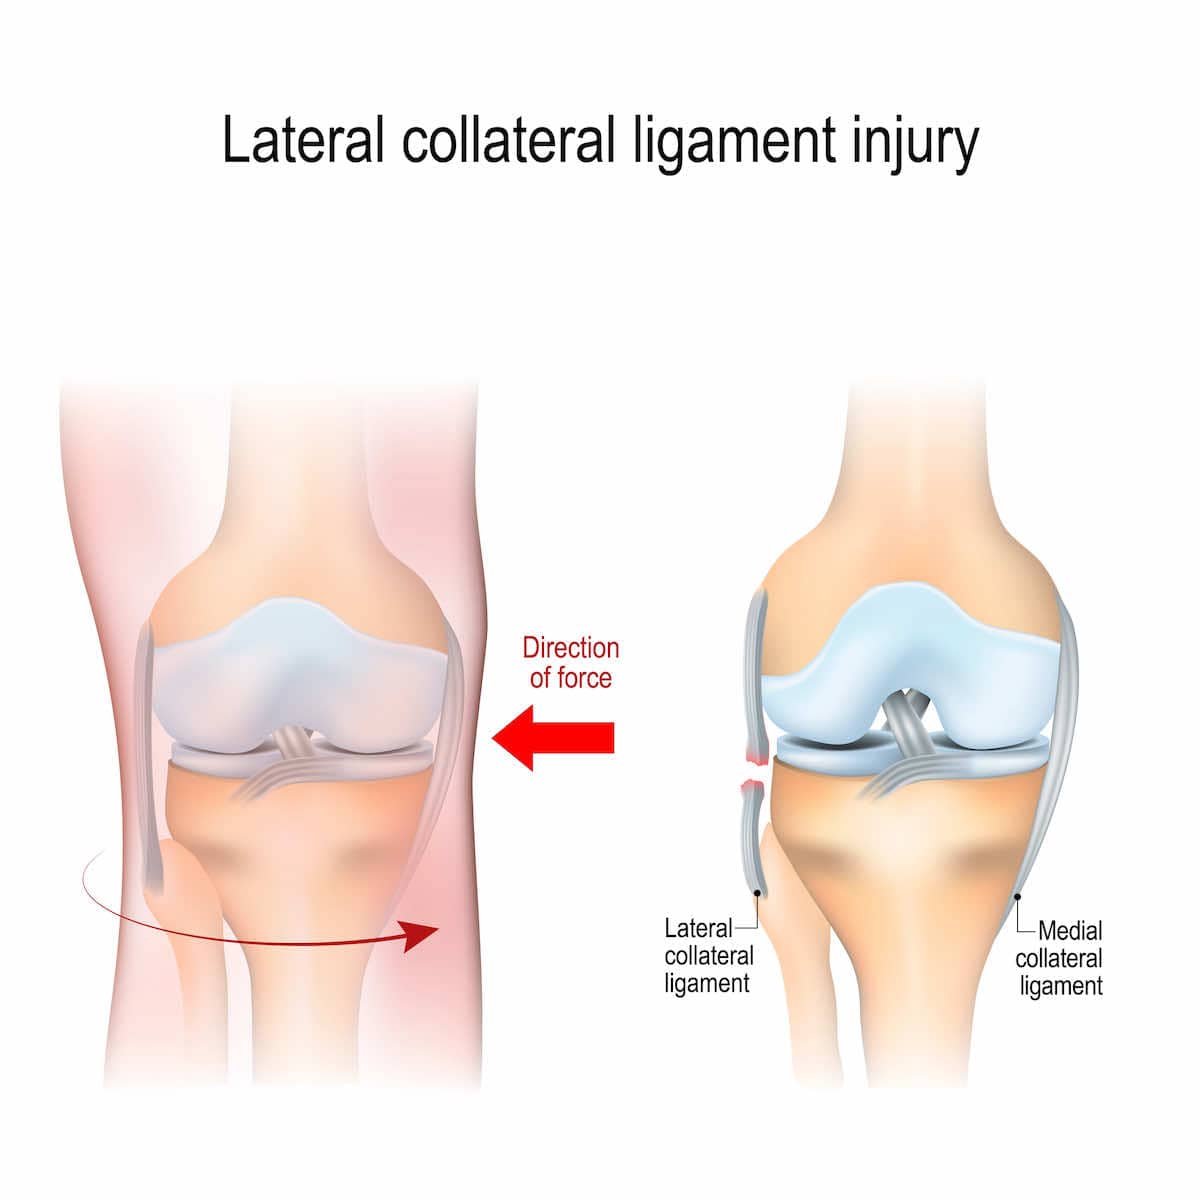 Lateral collateral ligament (LCL) injury